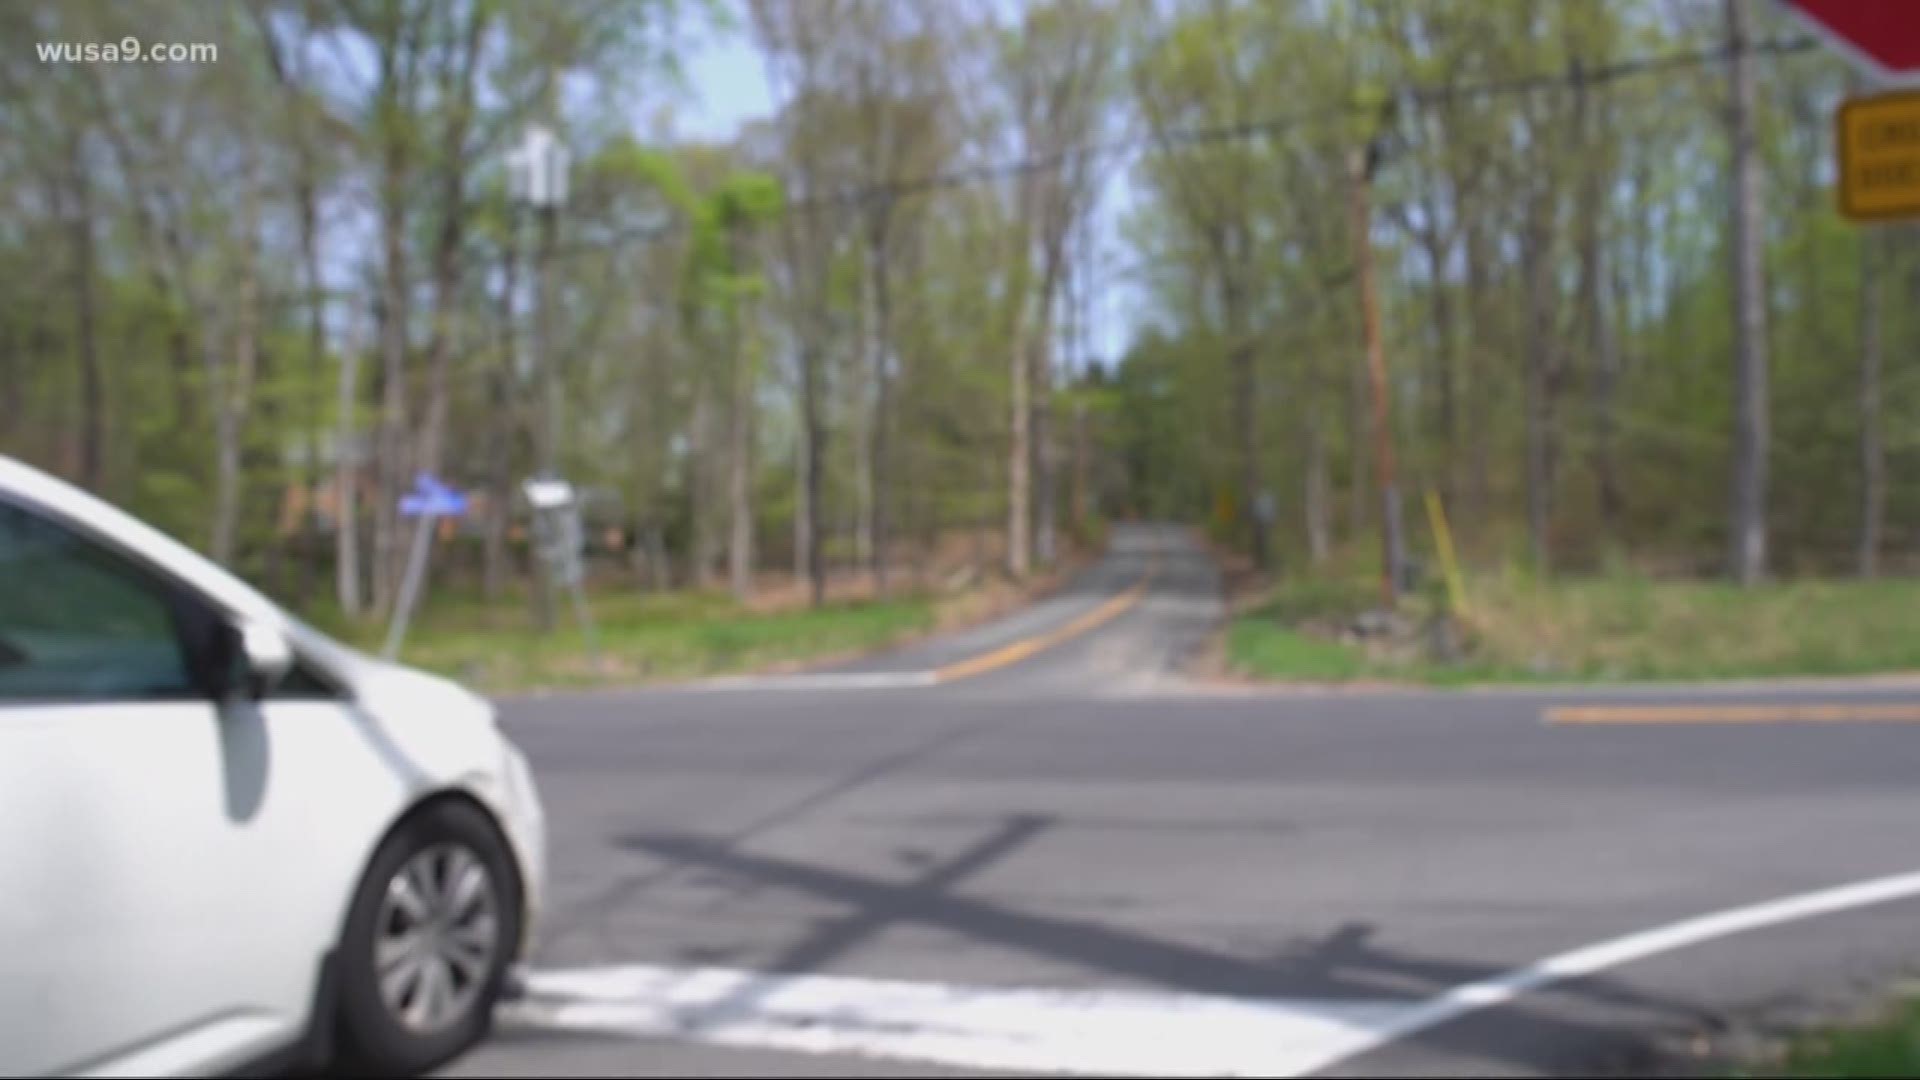 VDOT data shows that over the last two years, the intersection has seen at least 12 crashes.